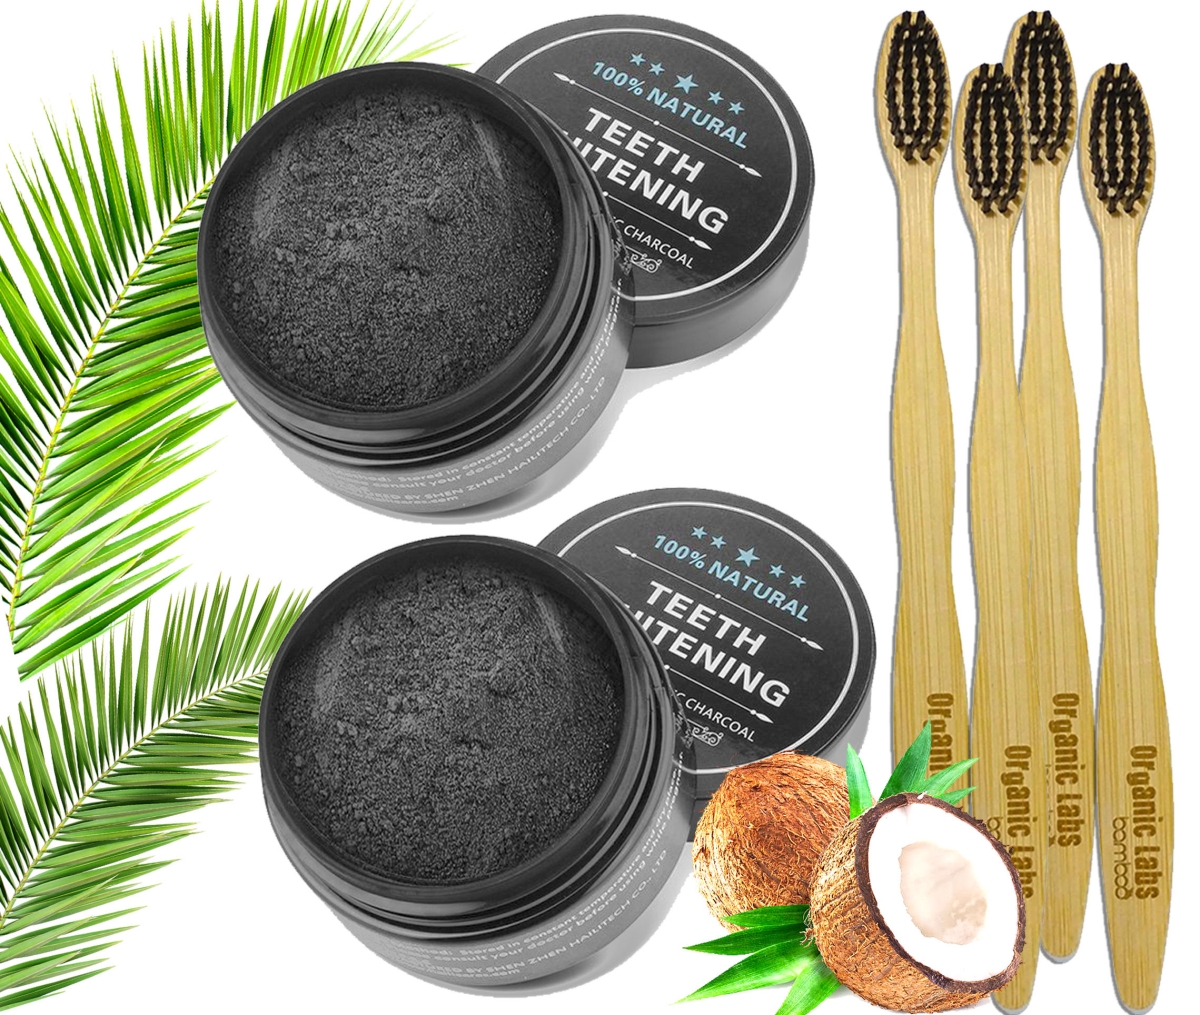 4036884 2 Charcoal Teeth Whitening Powder Natural Organic Activated Charcoal Bamboo Toothpaste With 4 Bamboo Toothbrushes